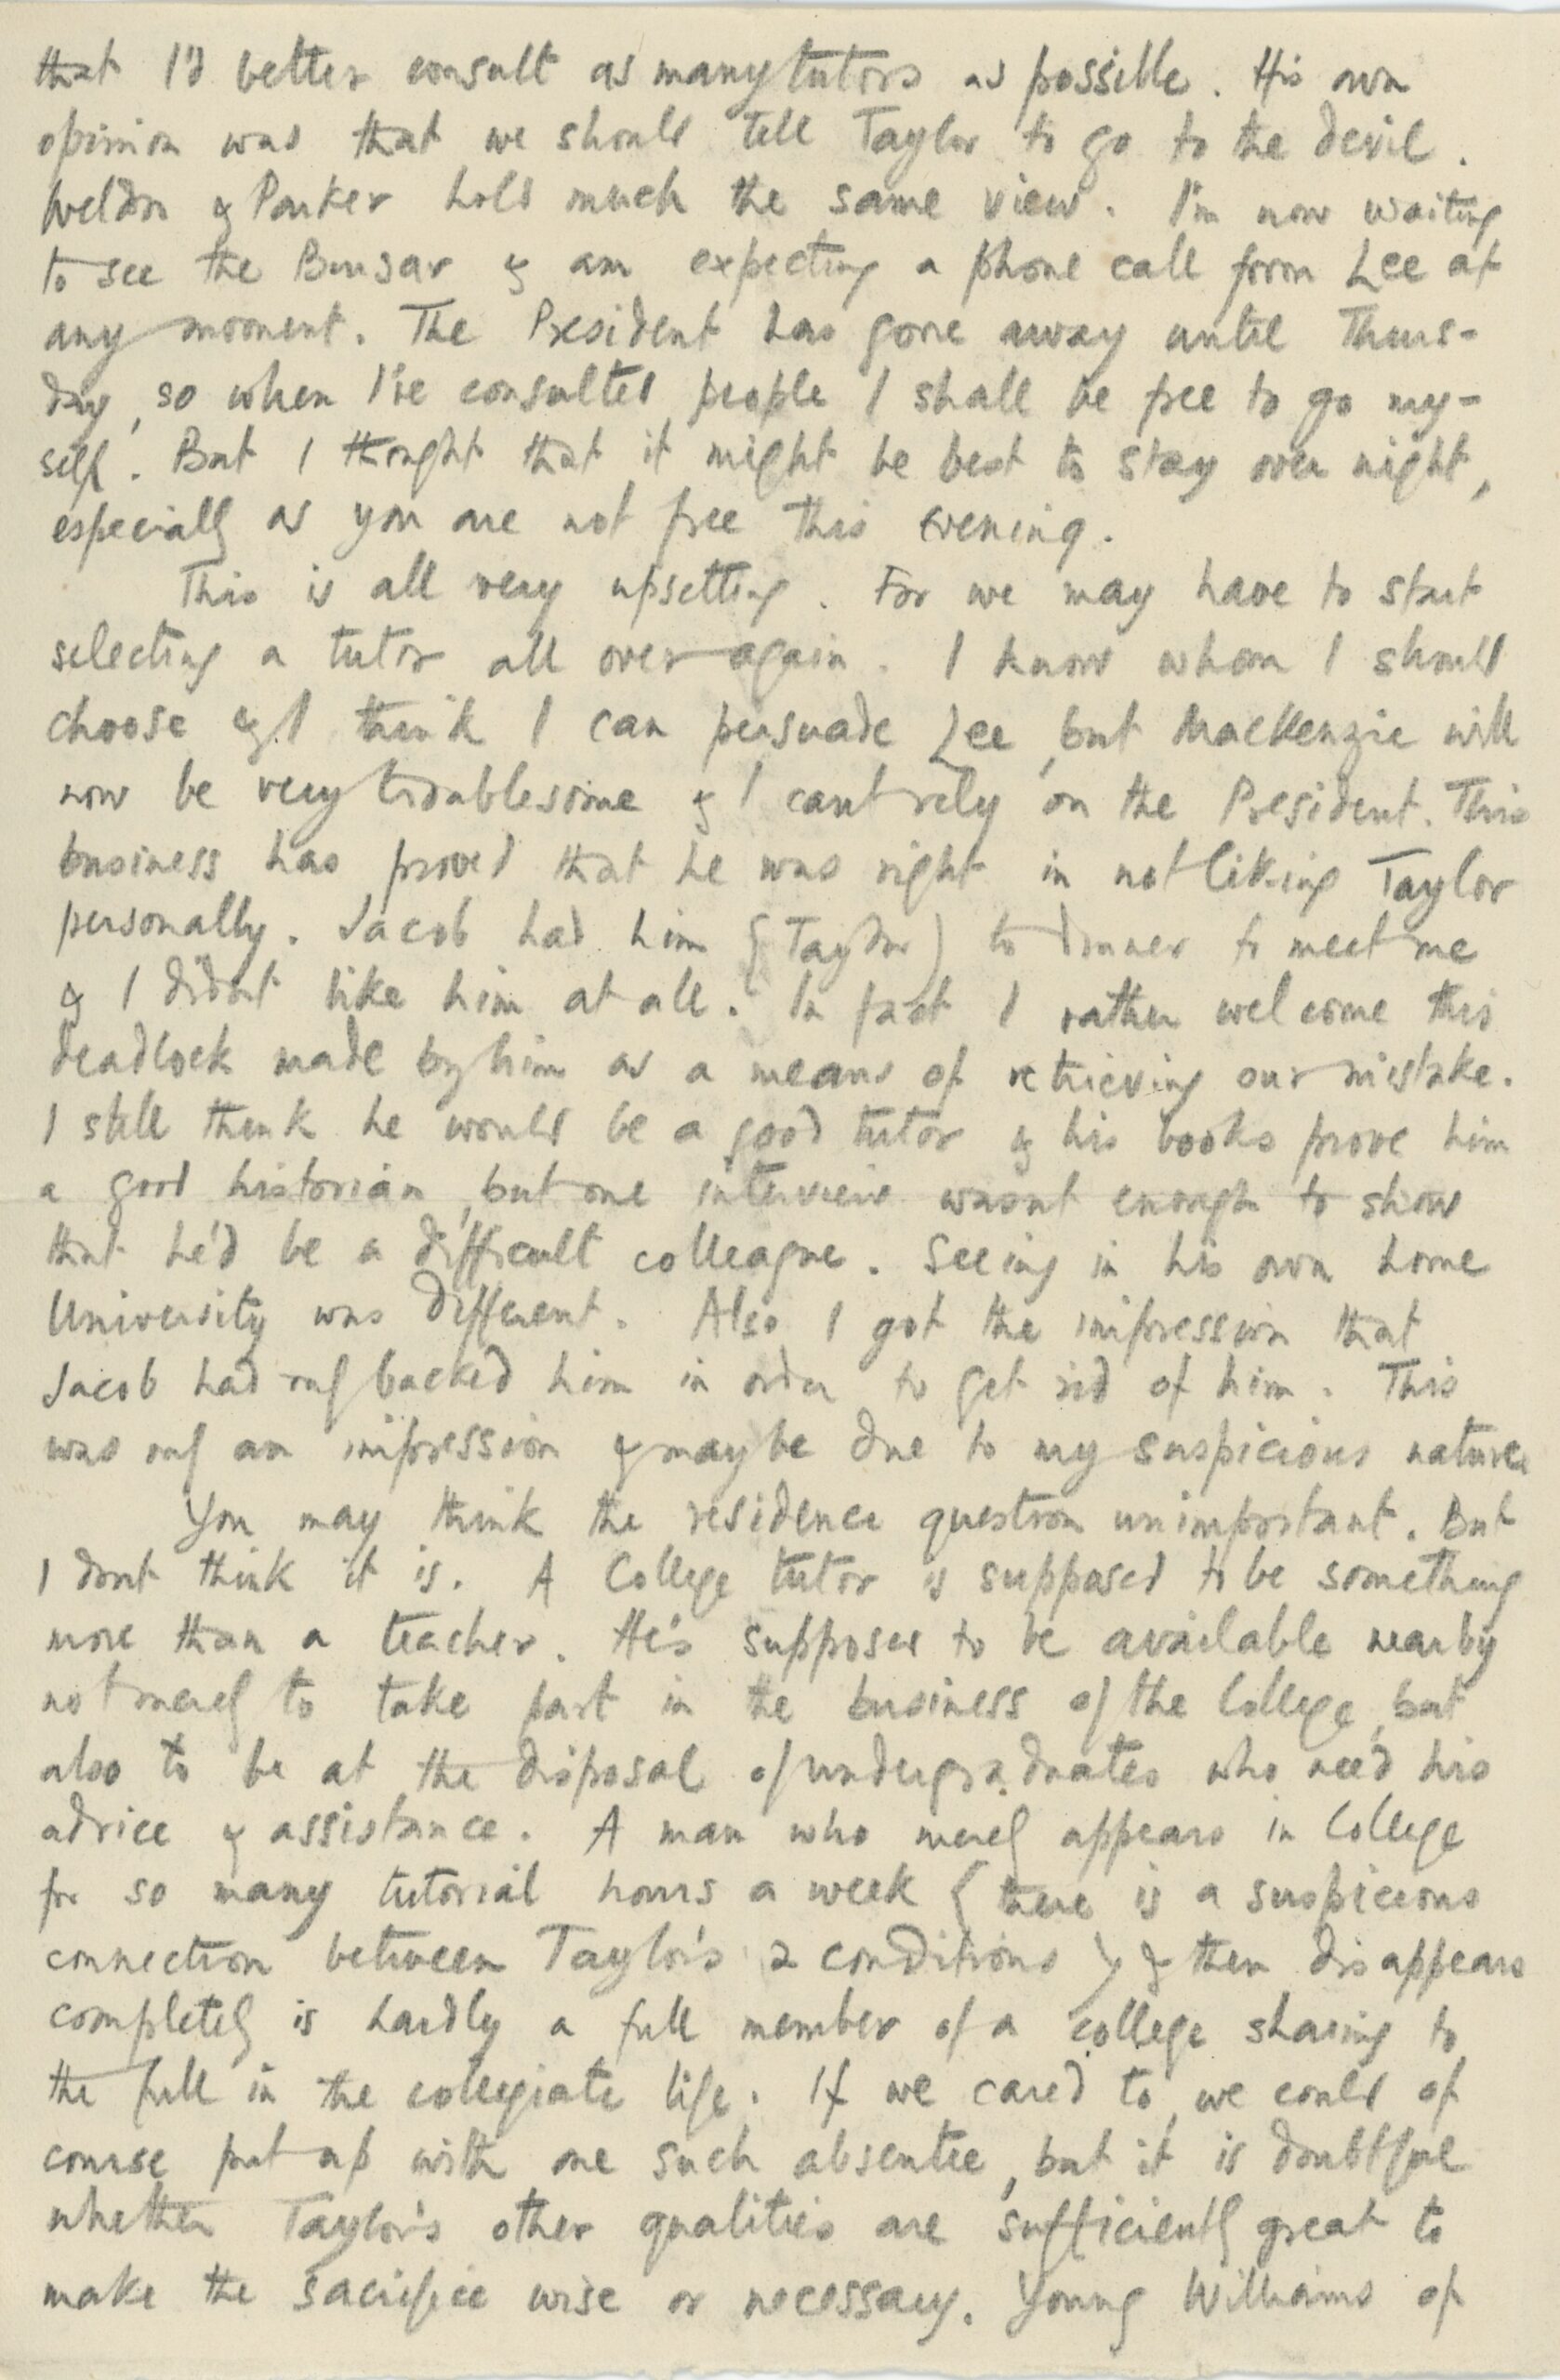 Second page of a handwritten letter on a small sheet of paper. The text, written in pencil, reads: that I’d better consult as many tutors as possible. His own opinion was that we should tell Taylor to got to the devil. Weldon & Parker hold much the same view. I’m now waiting to see the Bursar & am expecting a phone call from Lee at any moment. The President has gone away until Thursday, so when I’ve consulted people I shall be free to go myself. But I thought that it might be best to stay over night, especially as you are not free in the evening. This is all very upsetting. For we may have to start selecting a tutor all over again. I know whom I shall choose & I think I can persuade Lee, but MacKenzie will now be very troublesome & I can’t rely on the President. This business has proved that he was right in not liking Taylor personally. Jack had him (Taylor) to dinner to meet me & I didn’t like him at all. In fact I rather welcome this deadlock made by him as a means of retrieving our mistake. I still think he would be a good tutor & his books prove him a good historian but one interview was enough to show that he’d be a difficult colleague. Seeing in his own home University was different. Also I got the impression that Jacob had only backed him in order to get rid of him. This was only an impression & I maybe owe to my suspicious nature. You may think the residence question unimportant. But I don’t think it is. A College tutor is supposed to be something more than a teacher. He’s supposed to be available nearby not only to take part in the business of the College but also to be at the disposal of undergraduates who need his advice & assistance. A man who [merely?] appears in College for so many tutorial hours a week (there is a suspicious connection between Taylor’s 2 conditions) & then disappears completely is hardly a full member of the college sharing to the full in the collegiate life. If we cared to, we could of course put up with the such absente?, but it is doubtful whether Taylor’s other qualities are sufficiently great to make the sacrifice wise or necessary. Young Williams of